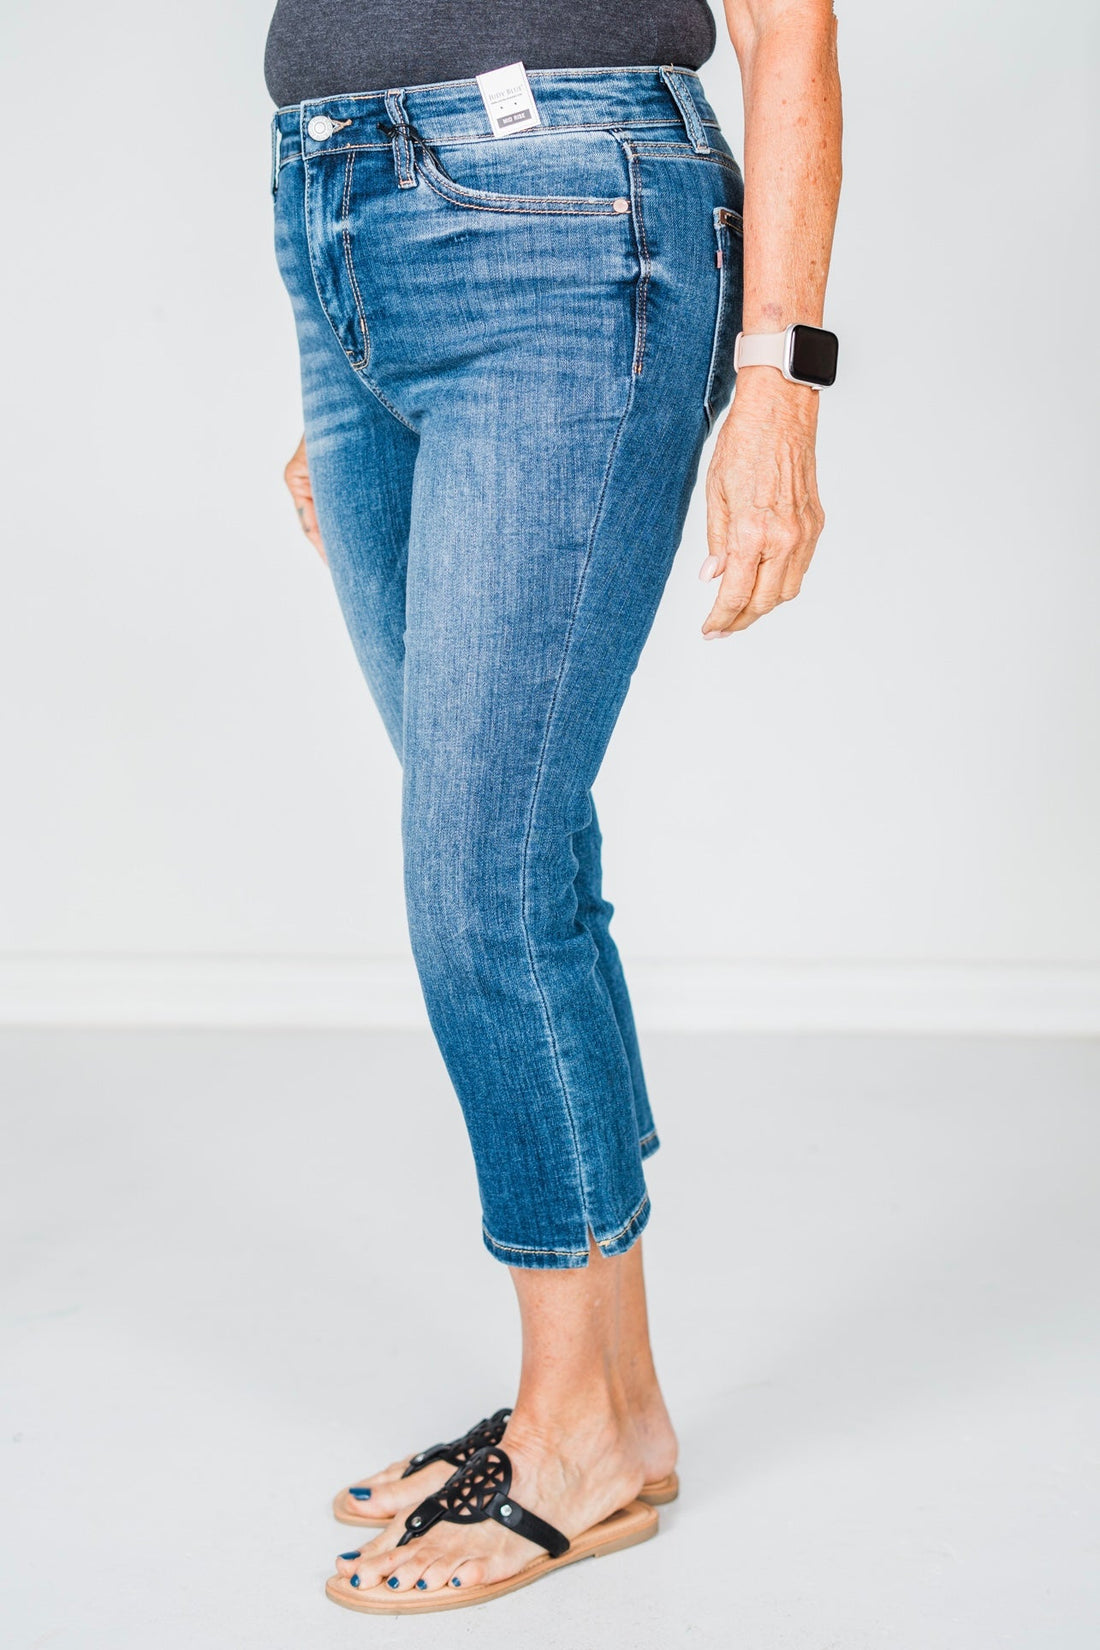 Judy Blue Mid Rise Capri With Side Slit - Whiskey Skies - JUDY BLUE